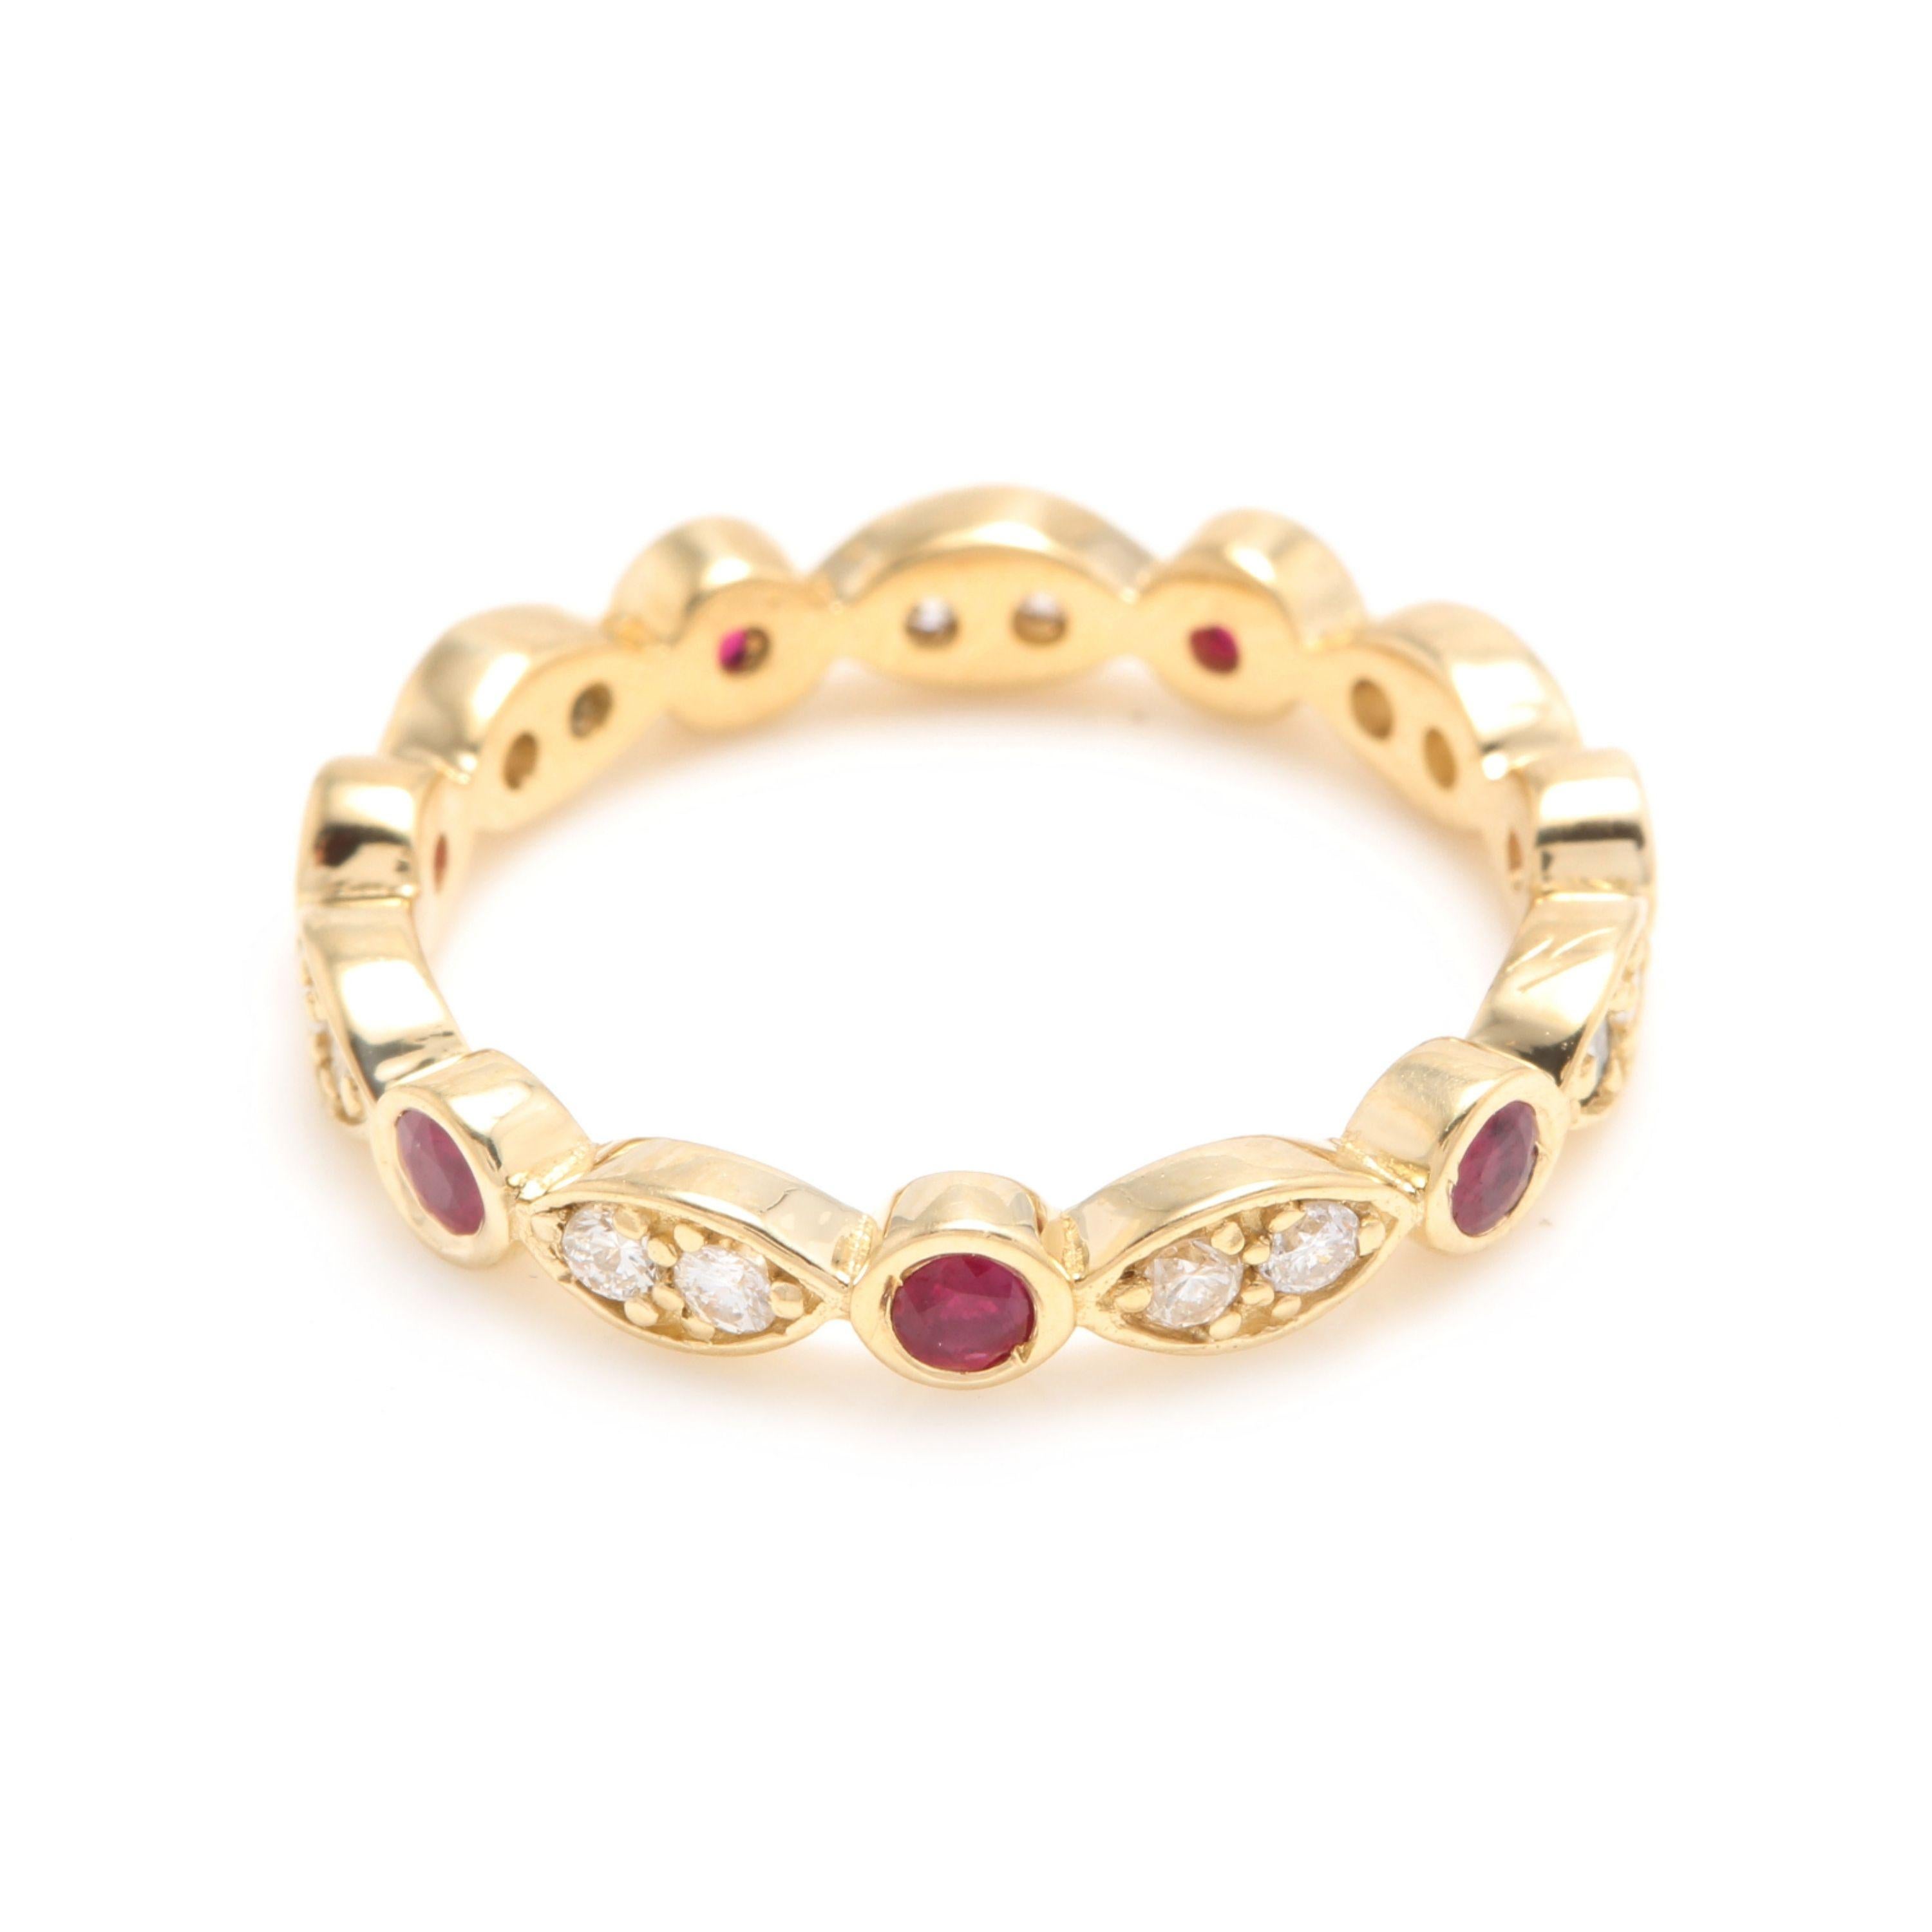 Impressive Natural Untreated Ruby and Natural Diamond 14K White Gold Ring

The Width of the ring is: 3.10mm

Total Natural Red Ruby Weight is Approx. 0.35ct

Ruby Treatment: Untreated

Total Natural Round Diamond Weight is Approx. 0.30 Carats (color